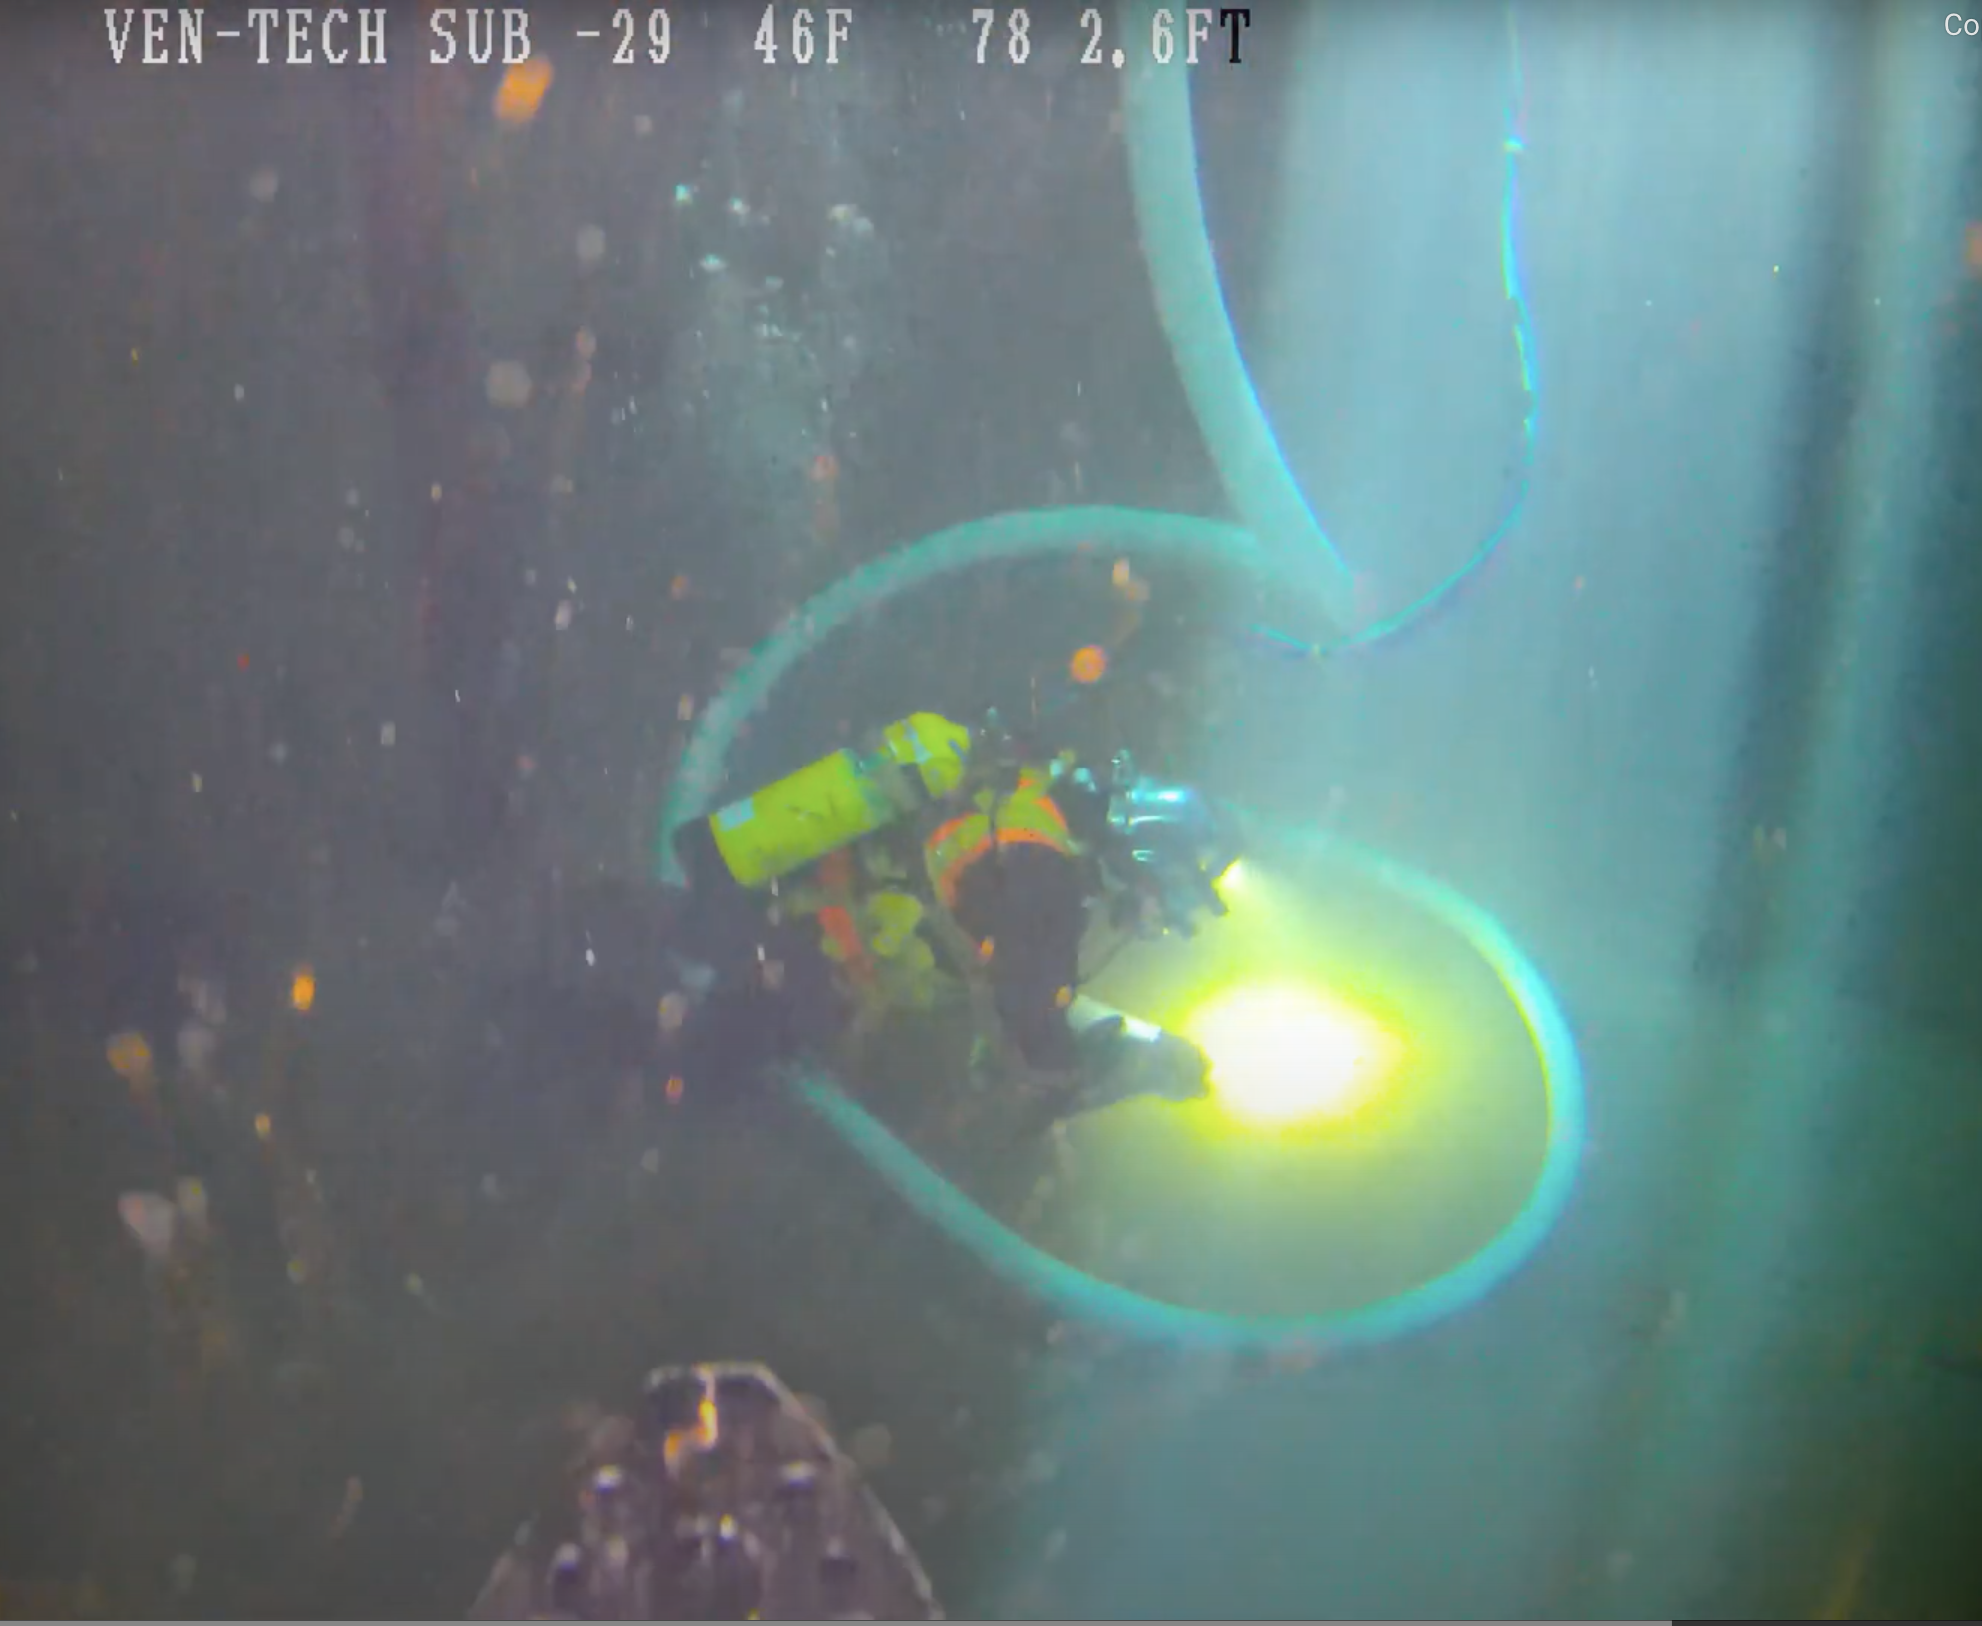 Greater Vancouver Underwater Inspection Services